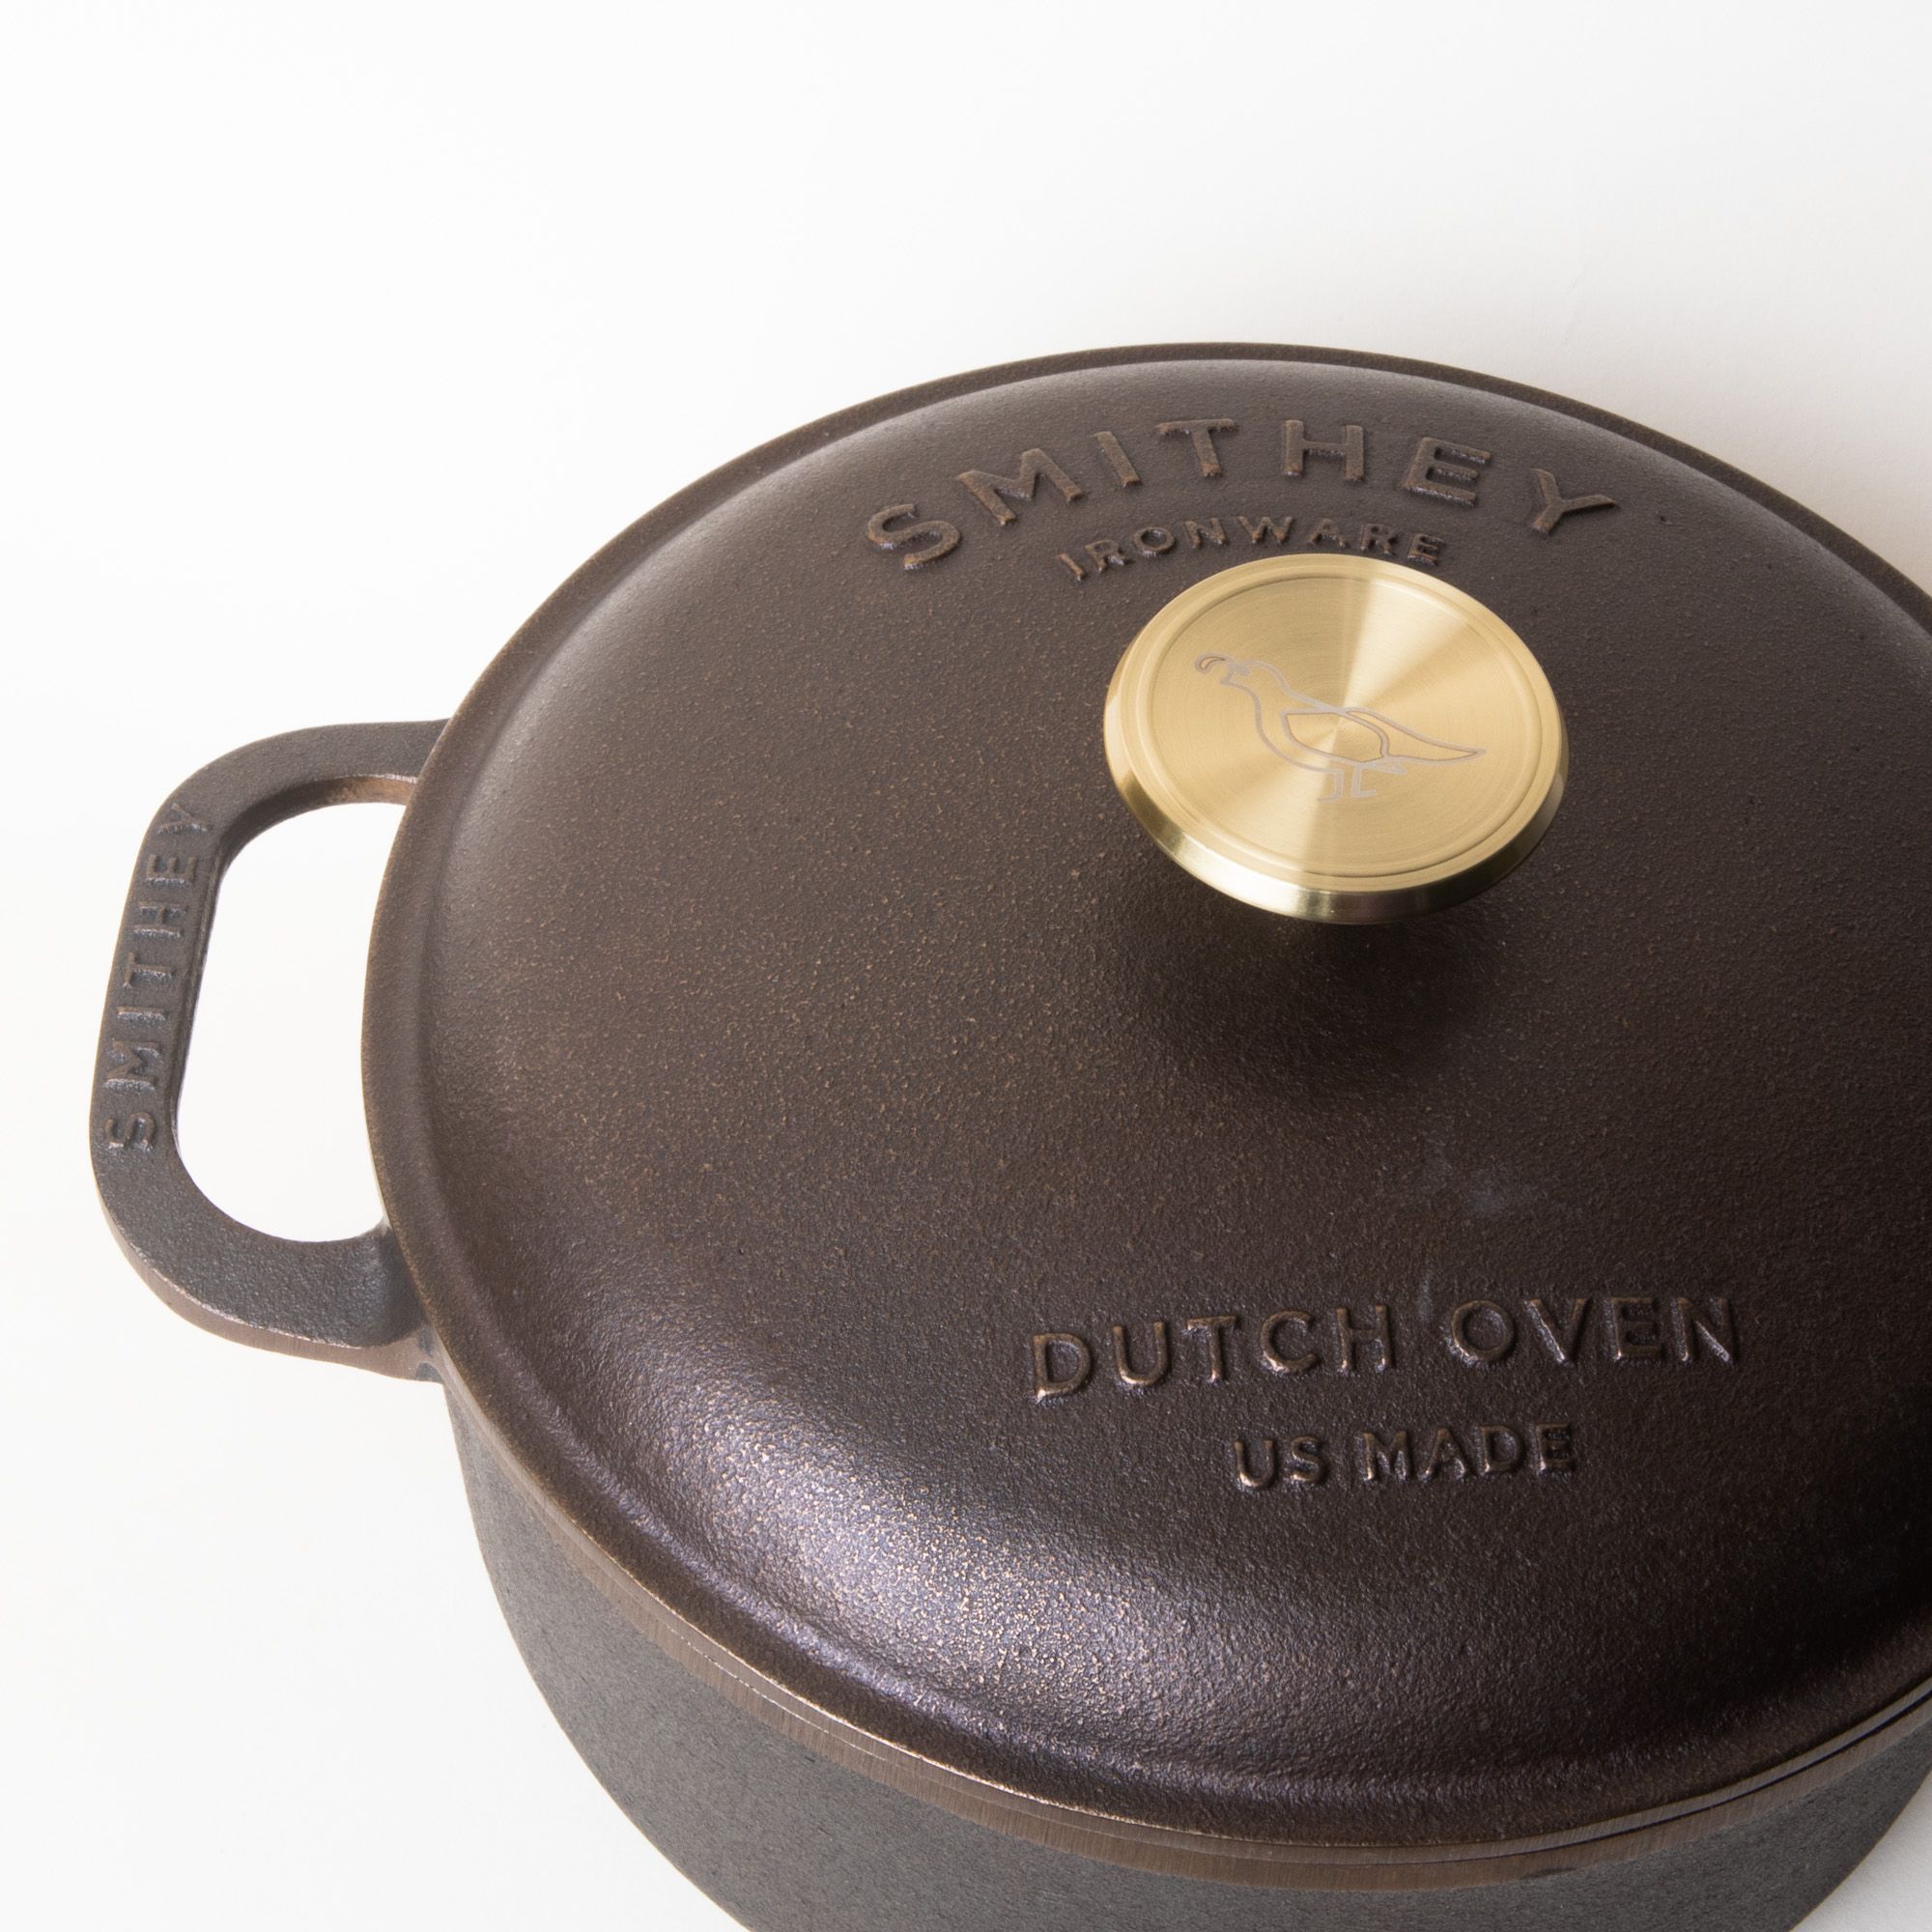 A cast iron lid with a gold metal knob in the center and surrounding it reads "Smithey Dutch Oven"